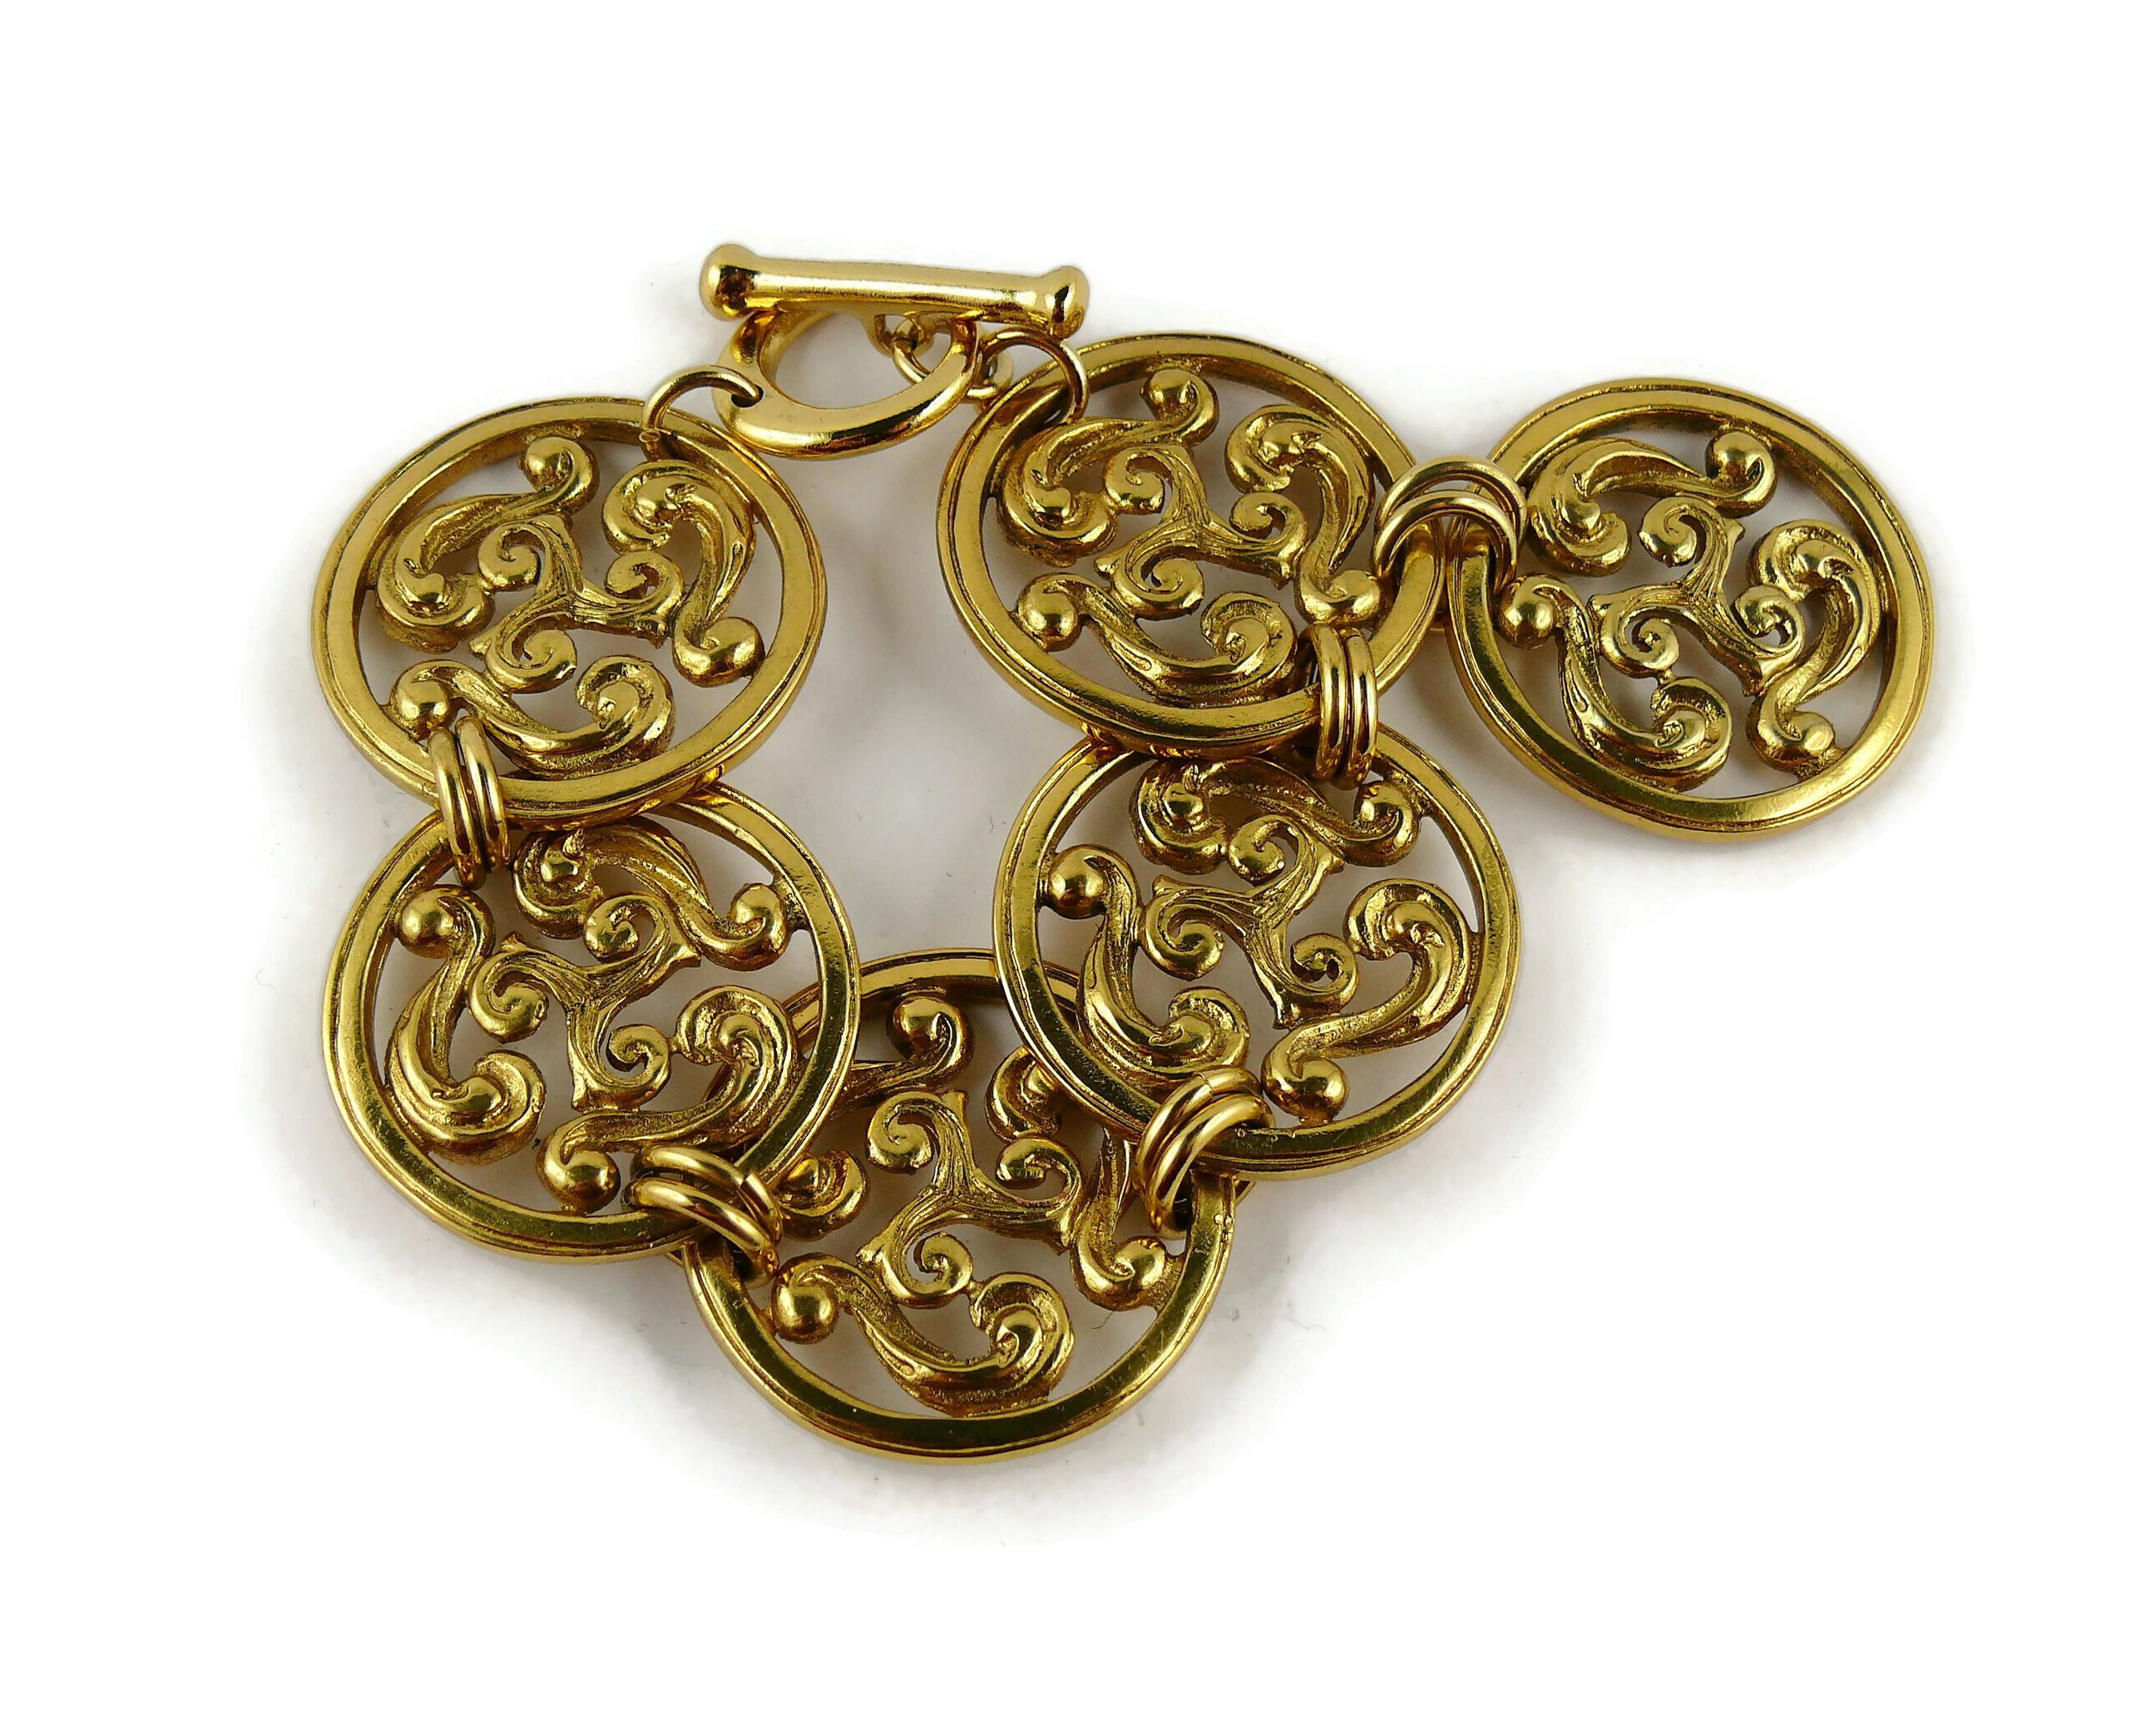 YVES SAINT LAURENT vintage gold toned bracelet and clip-on earrings set featuring an openwork scroll design.

Both earrings are embossed YSL Made in France.
Matching bracelet is unmarked.

Indicative measurements : earrings diameter approx. 4.4 cm